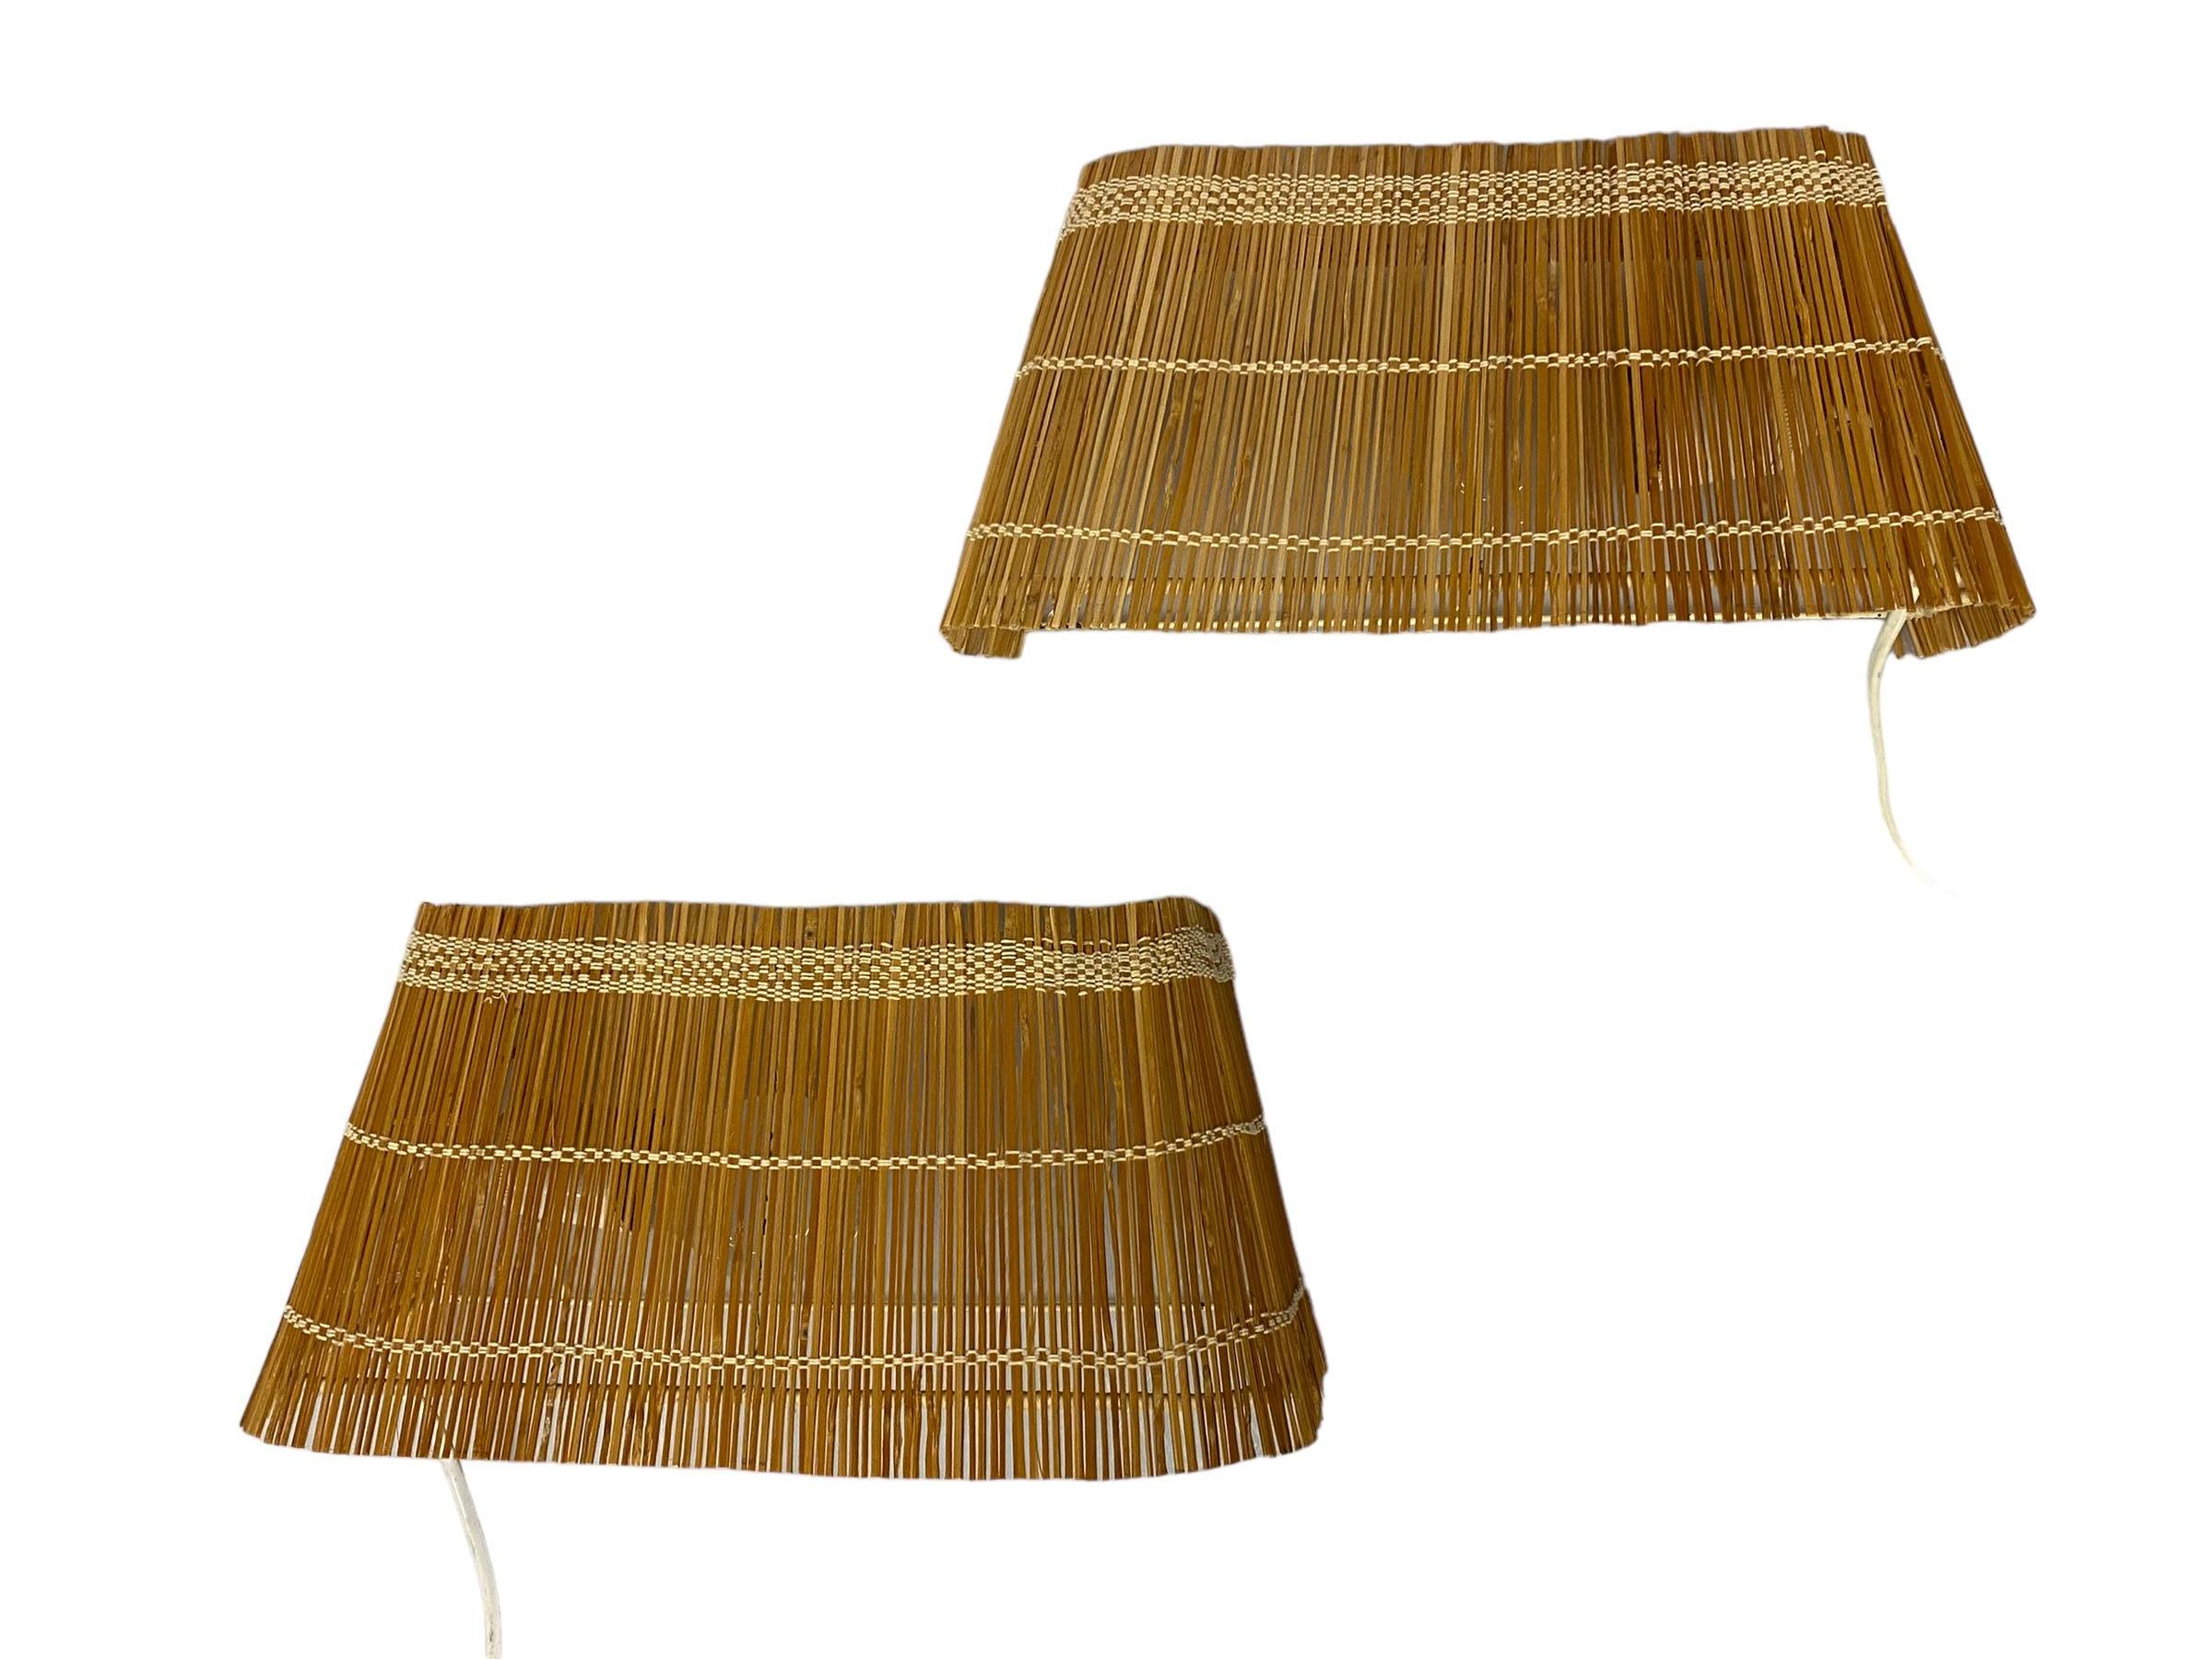 This type wall lamps was made by almost all lamp factories in the 1930-1960s including Taito, Idman, Itsu and Orno. When the light filters through the rattan shades the lamps have a very warm look that's very appealing to people. 
Unfortunately this